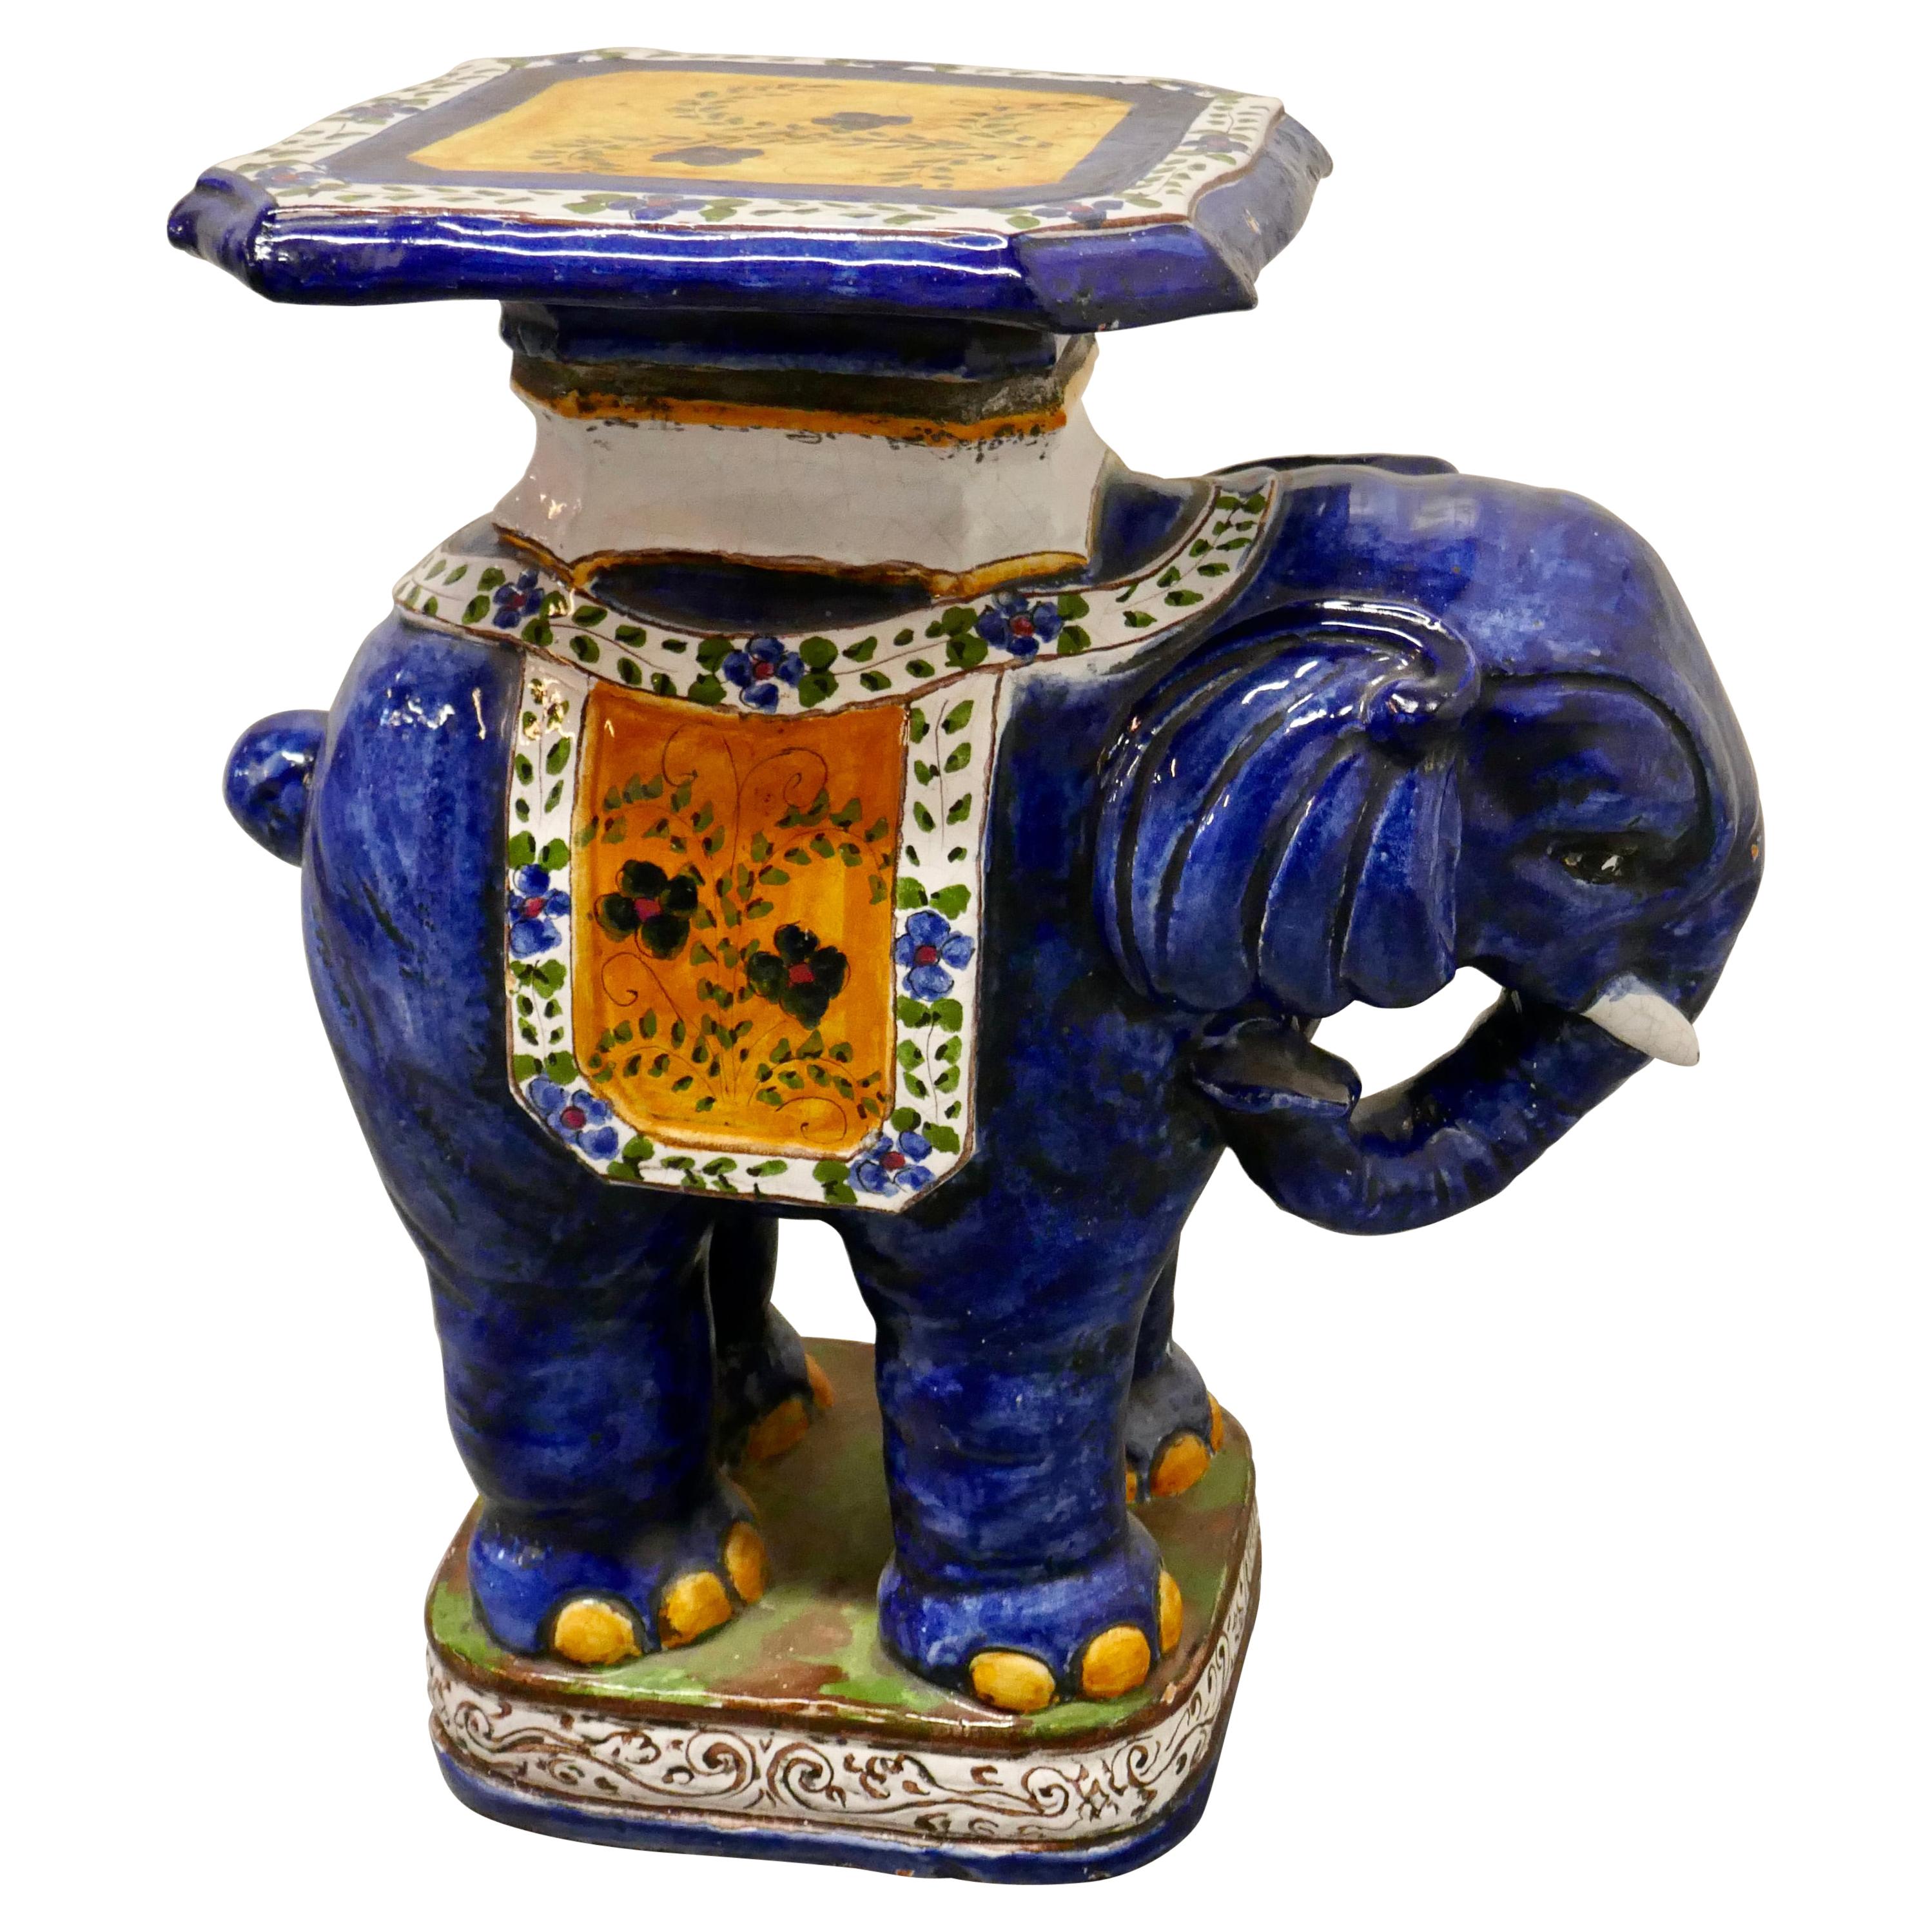 Colourful North African Terra Cotta Elephant Statue Seat